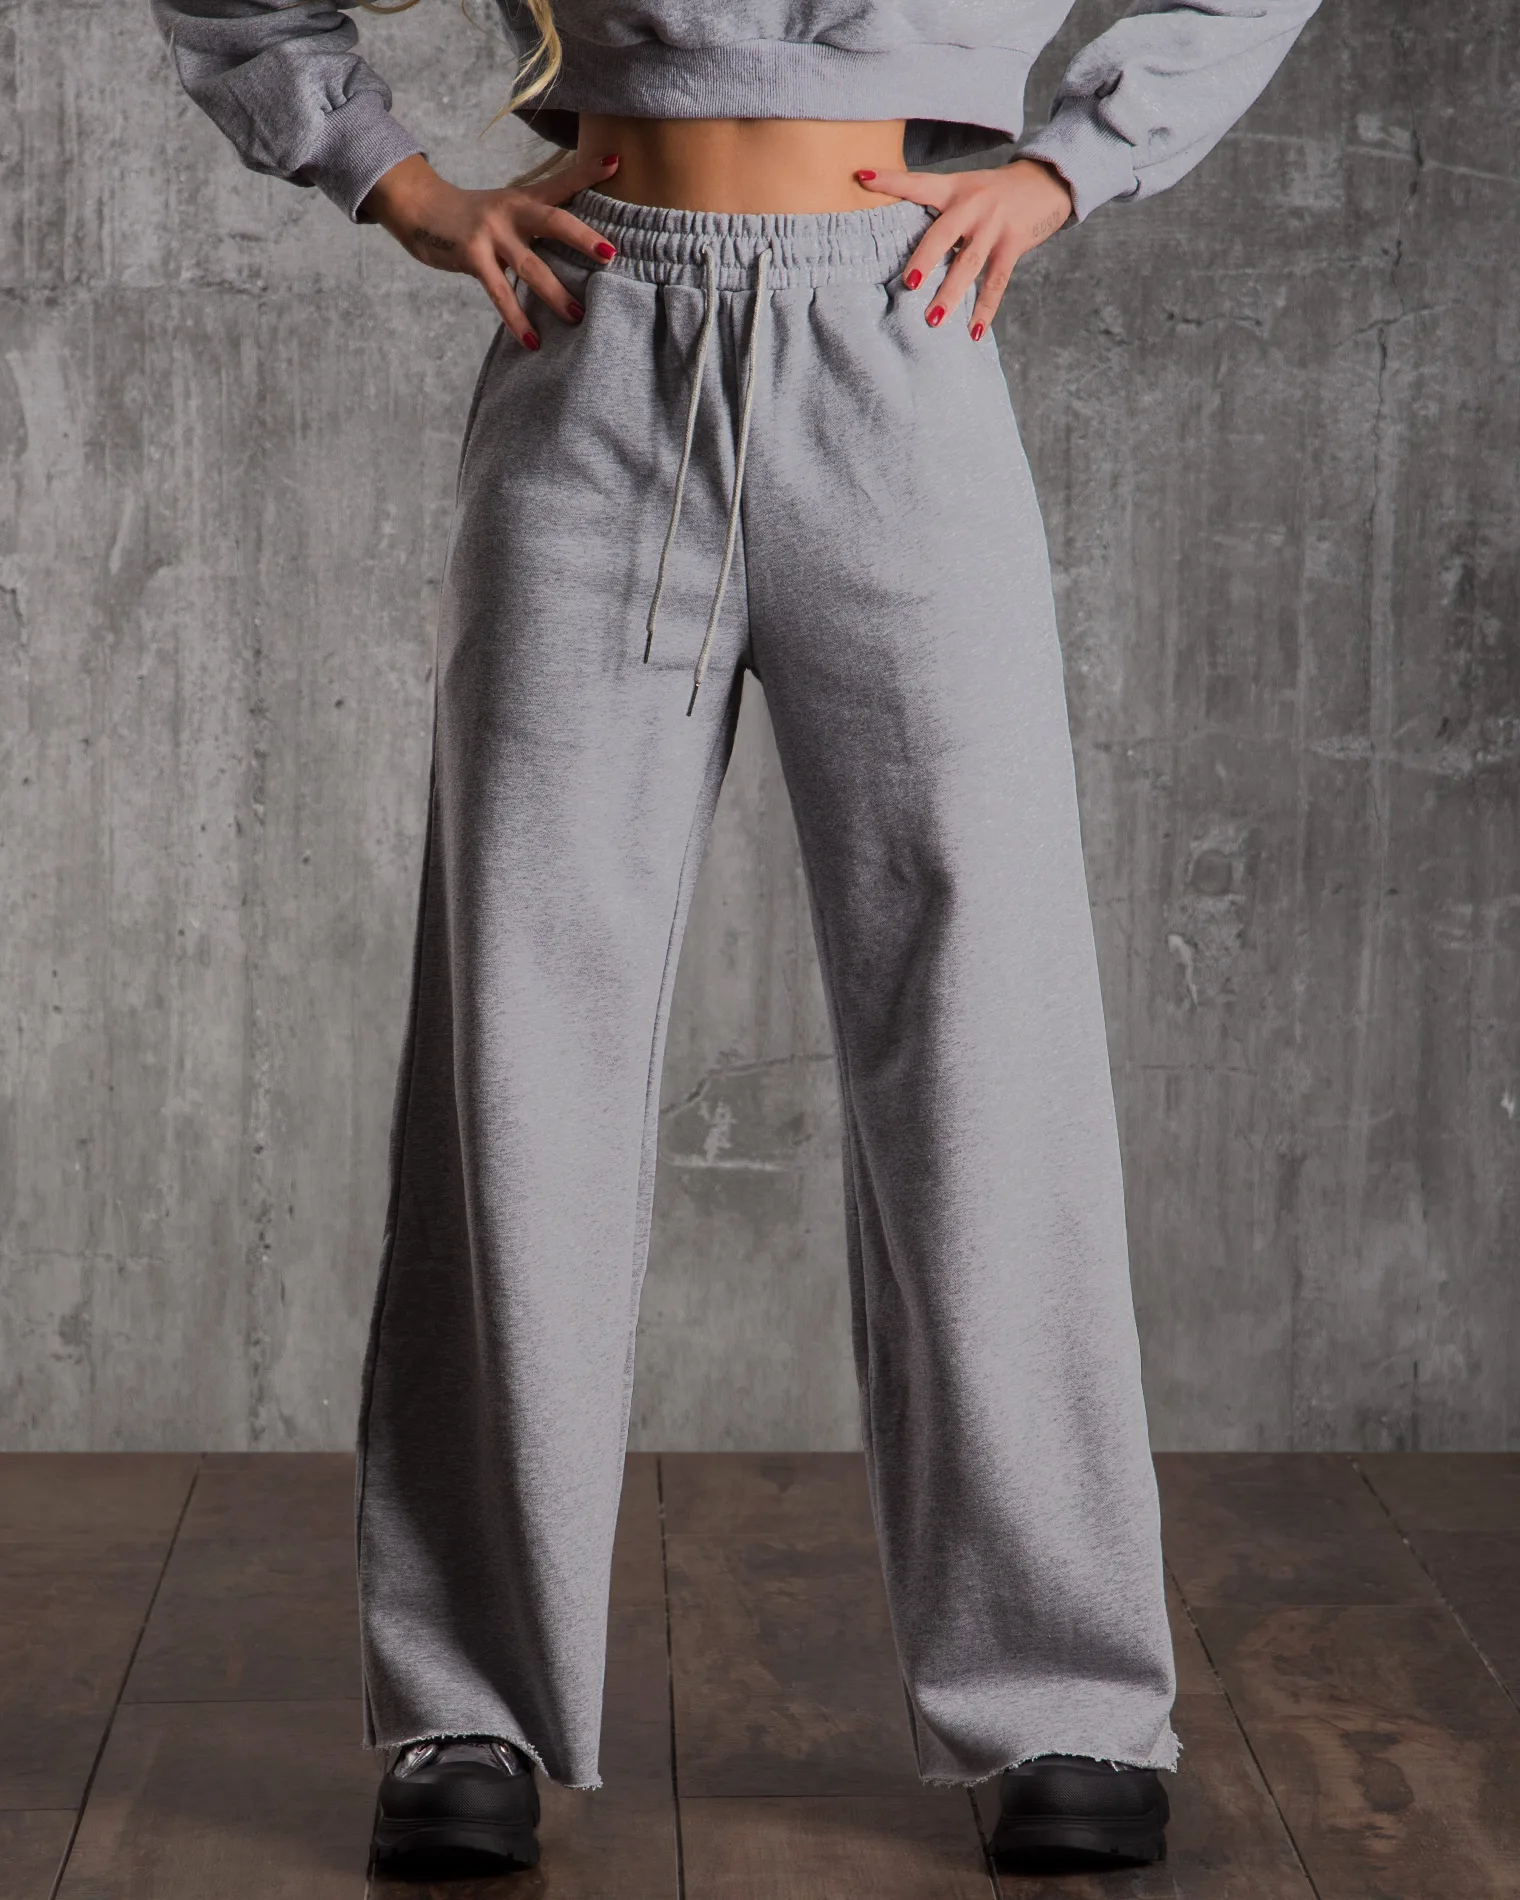 Opportunist Trousers, Grey Color